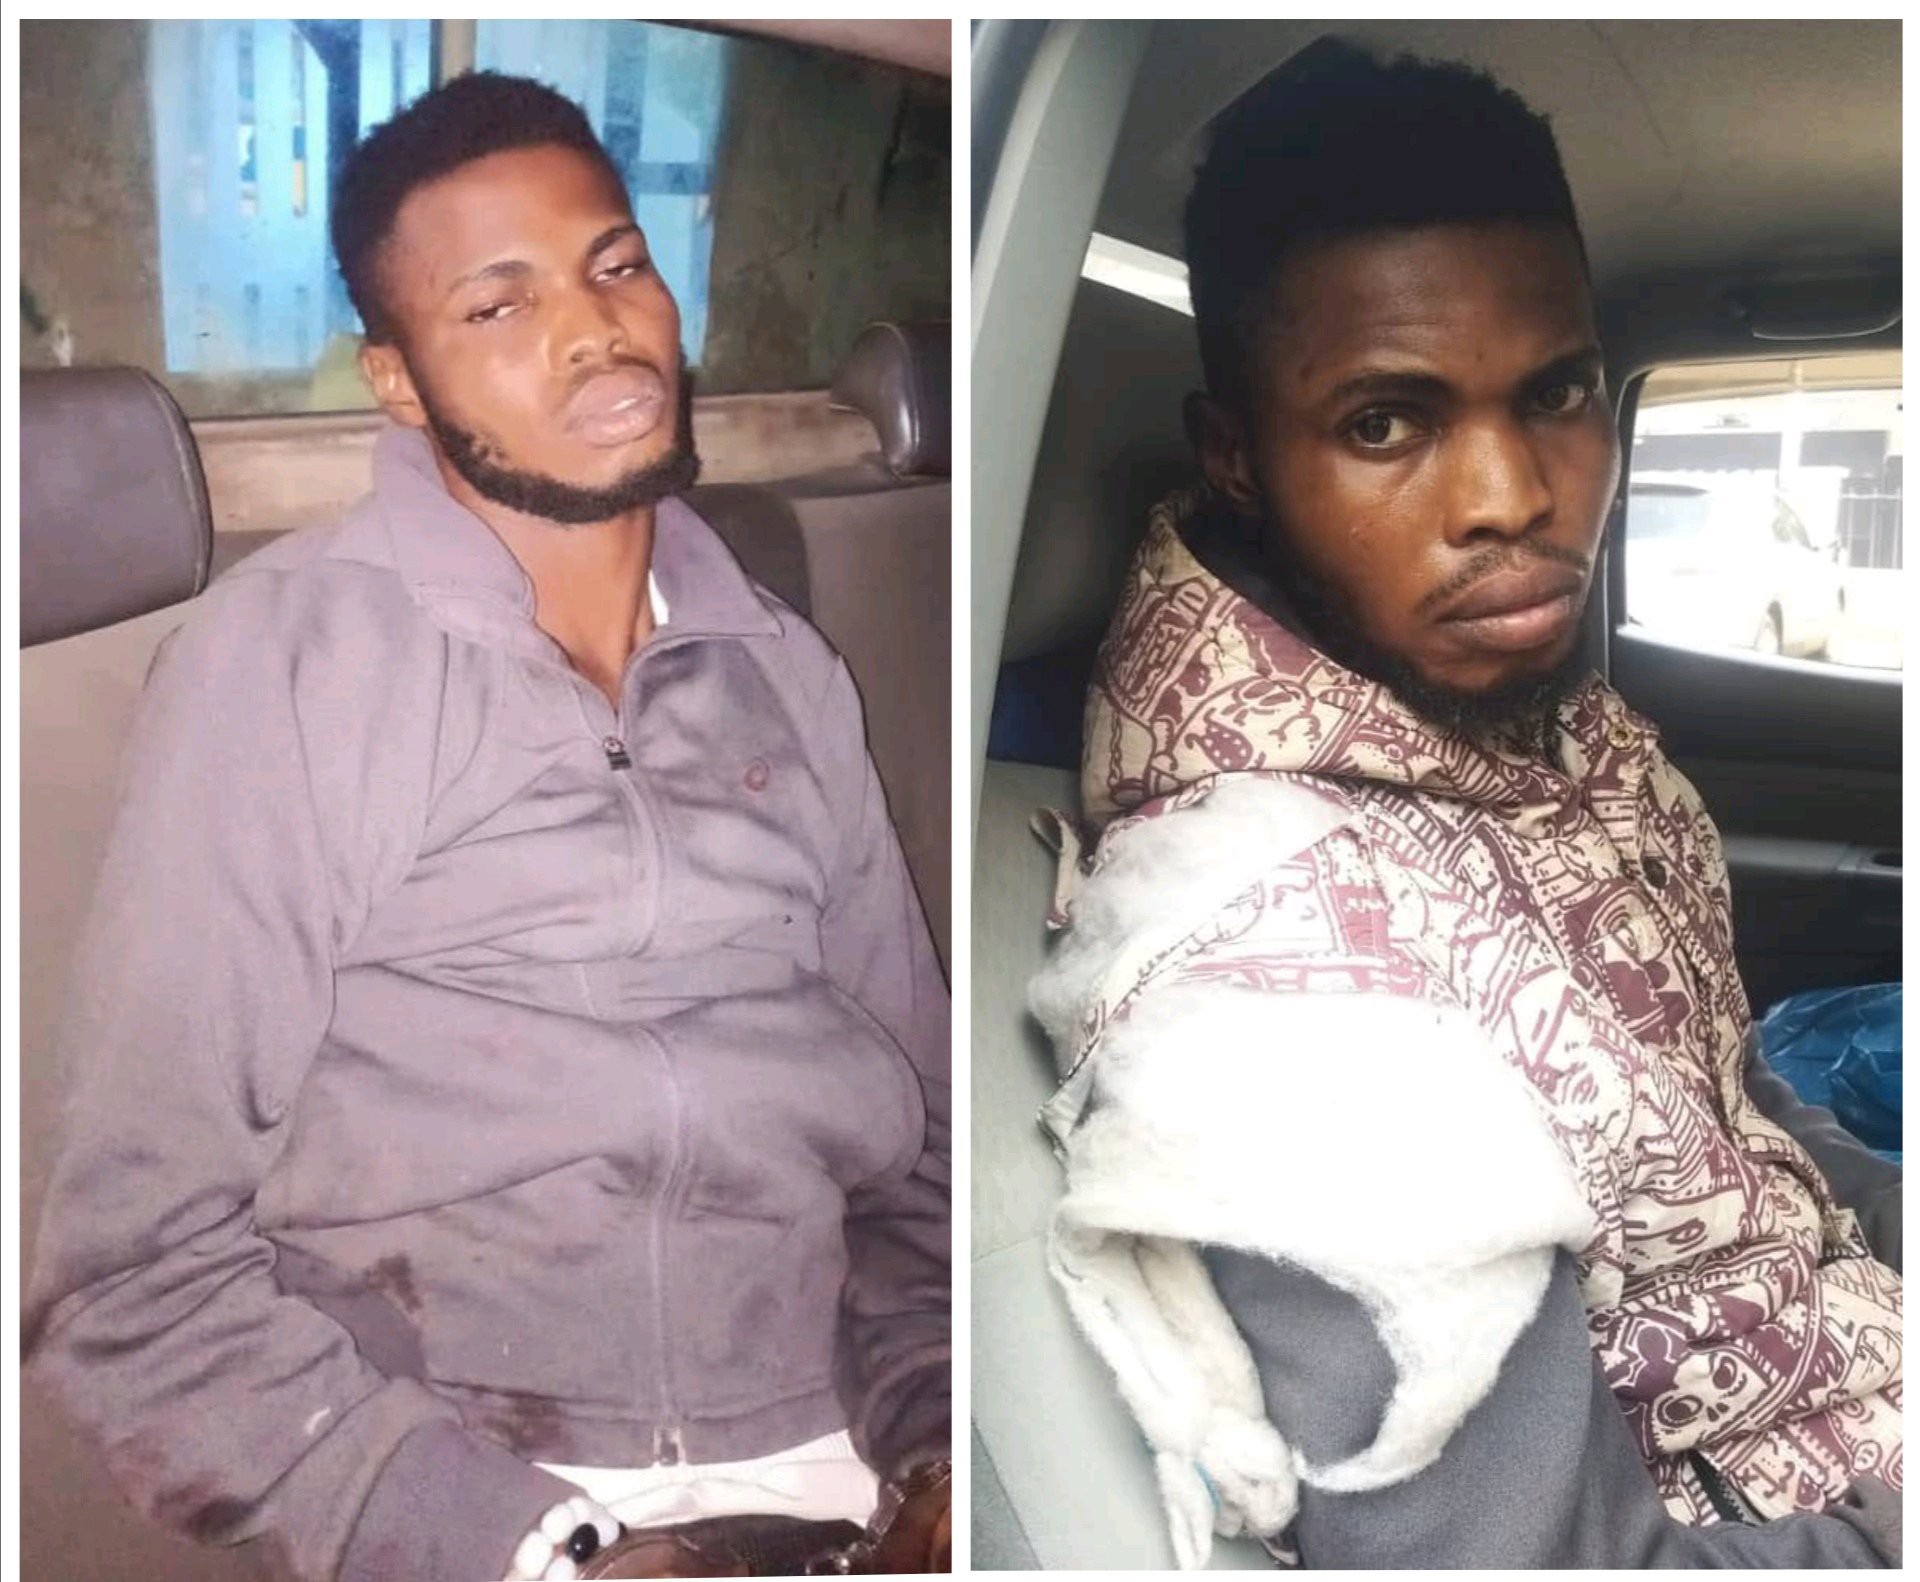 Mixed Reactions As Notorious Abuja Kidnapper Chinaza Philip Reveals He's Not A Kidnapper But An Armed Robber